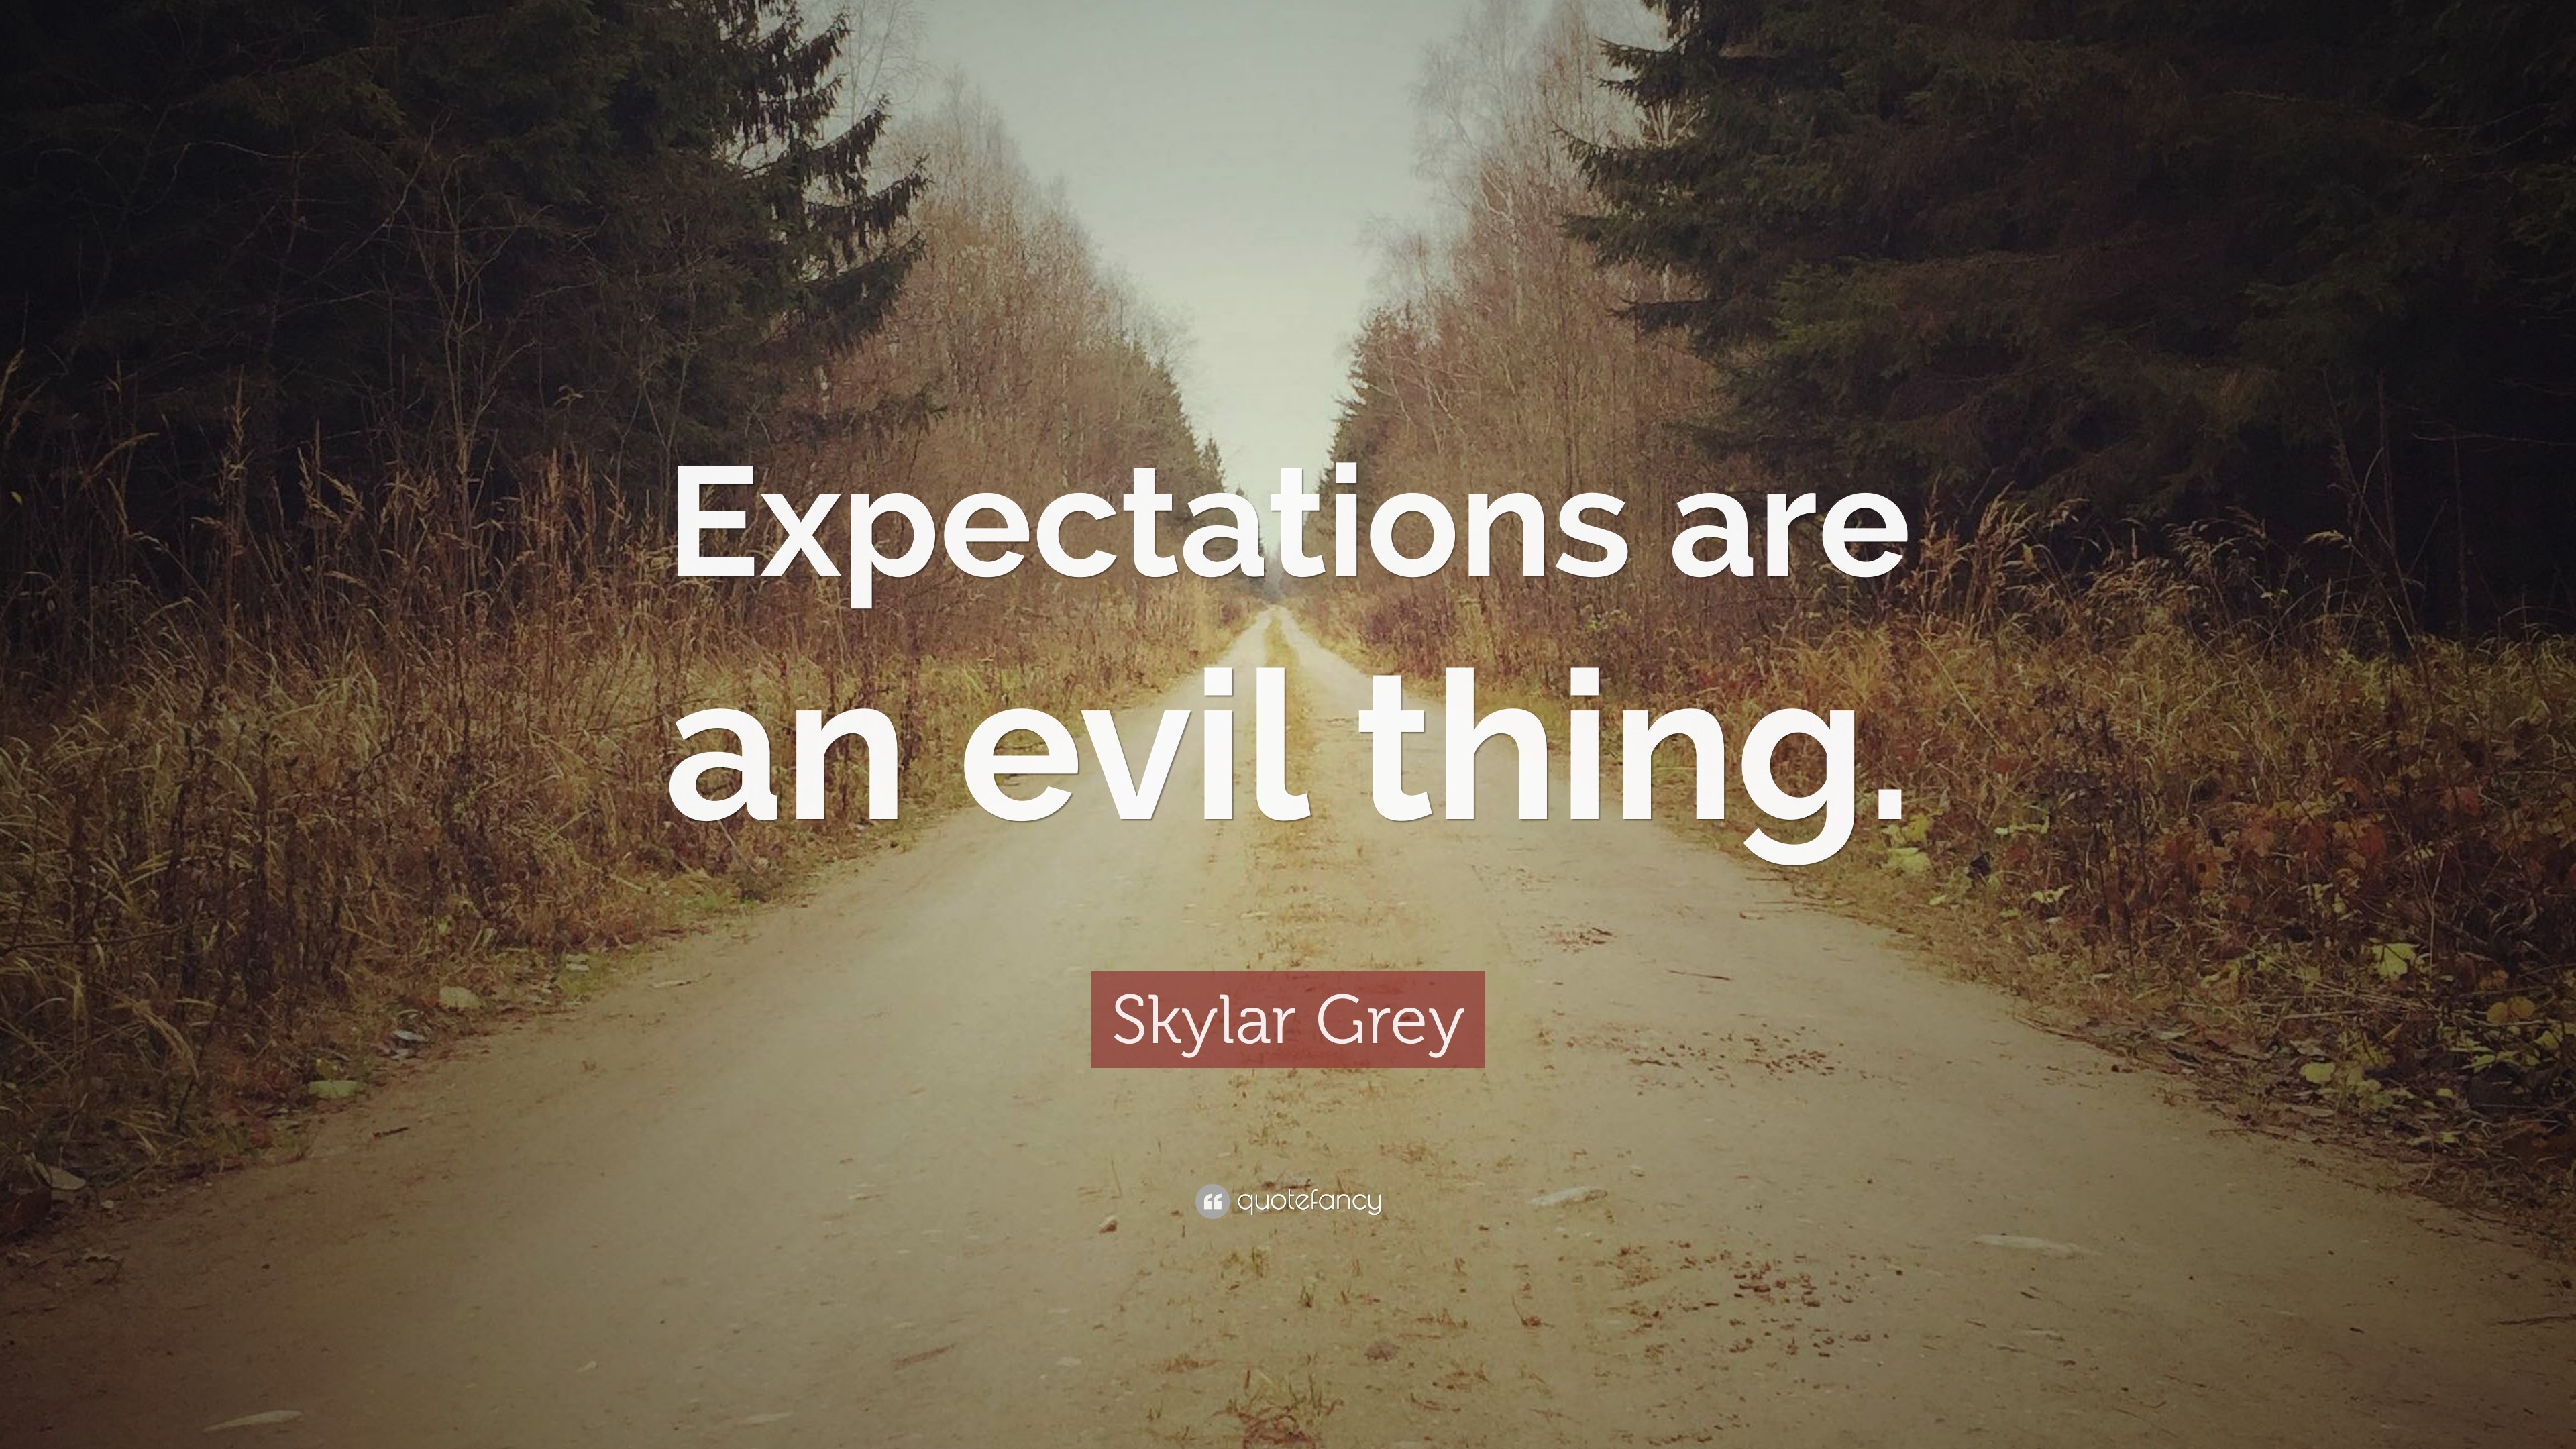 3840x2160 Skylar Grey Quote: “Expectations are an evil thing.”